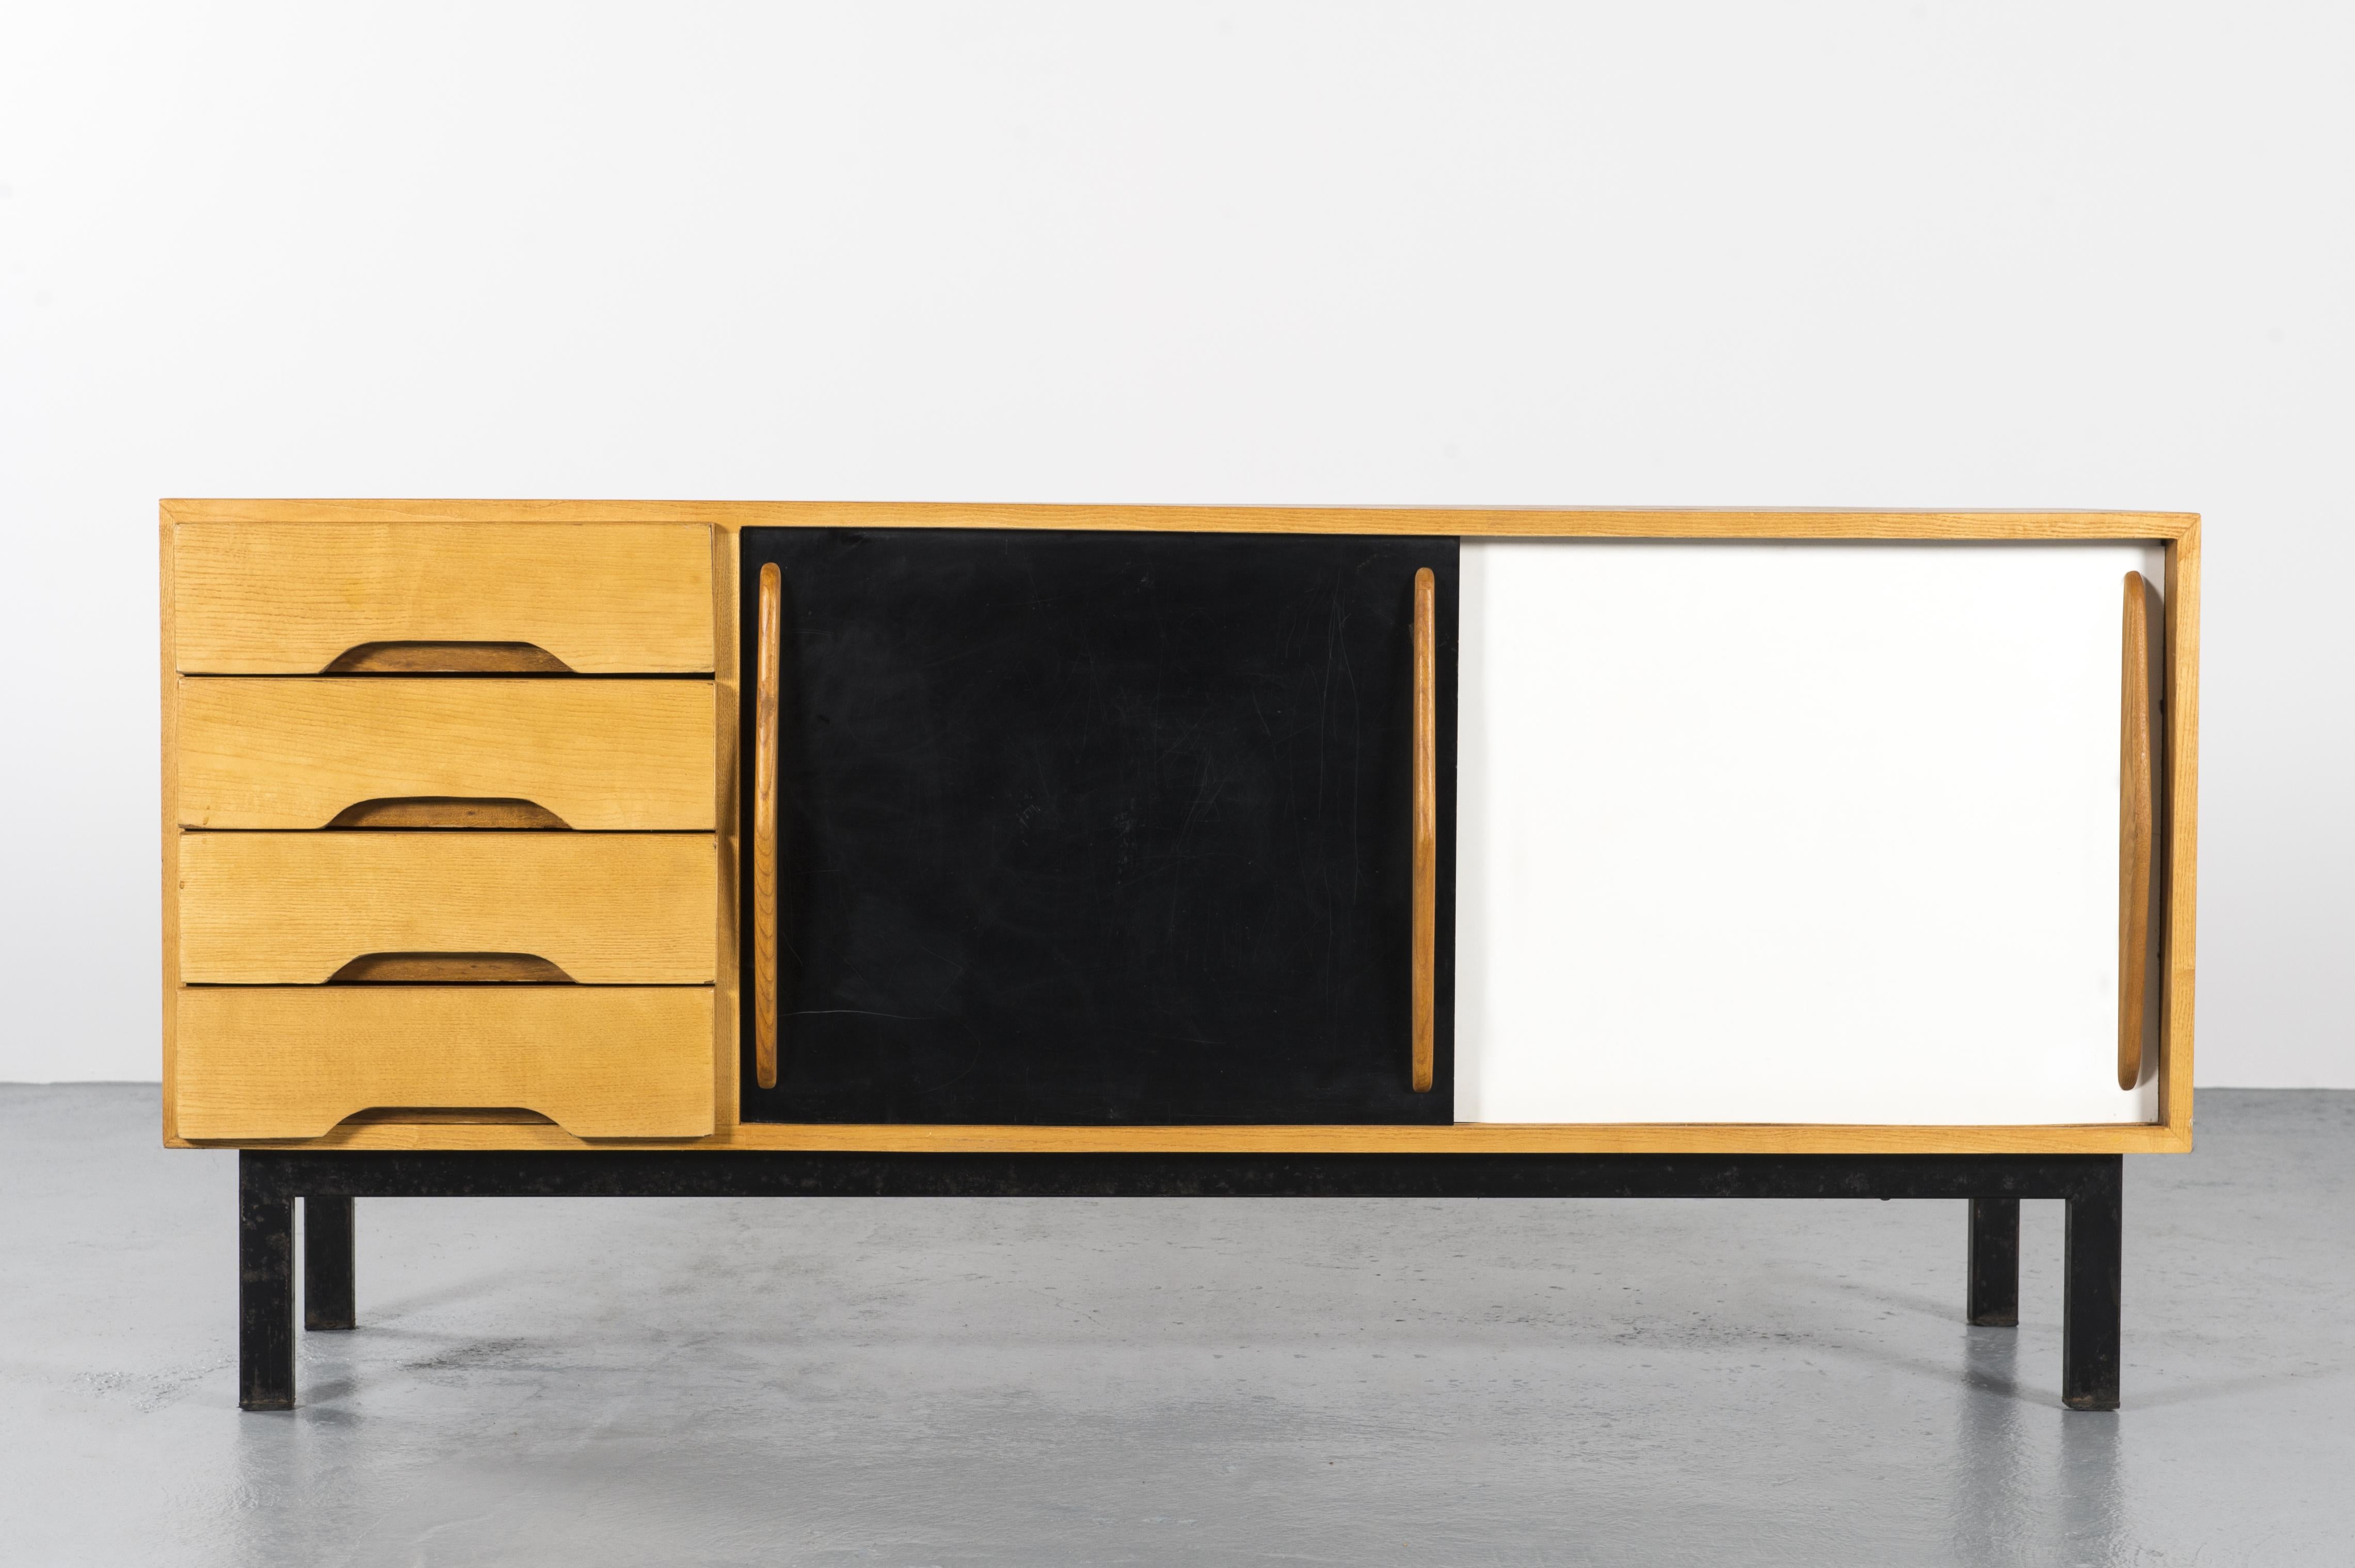 Cansado mining town Charlotte Perriand sideboard, circa 1960, Mauritania, North Africa

Sideboard in ash wood, two sliding doors in black and white laminated formica and four drawers on the side. The base is in painted black metal.

Charlotte